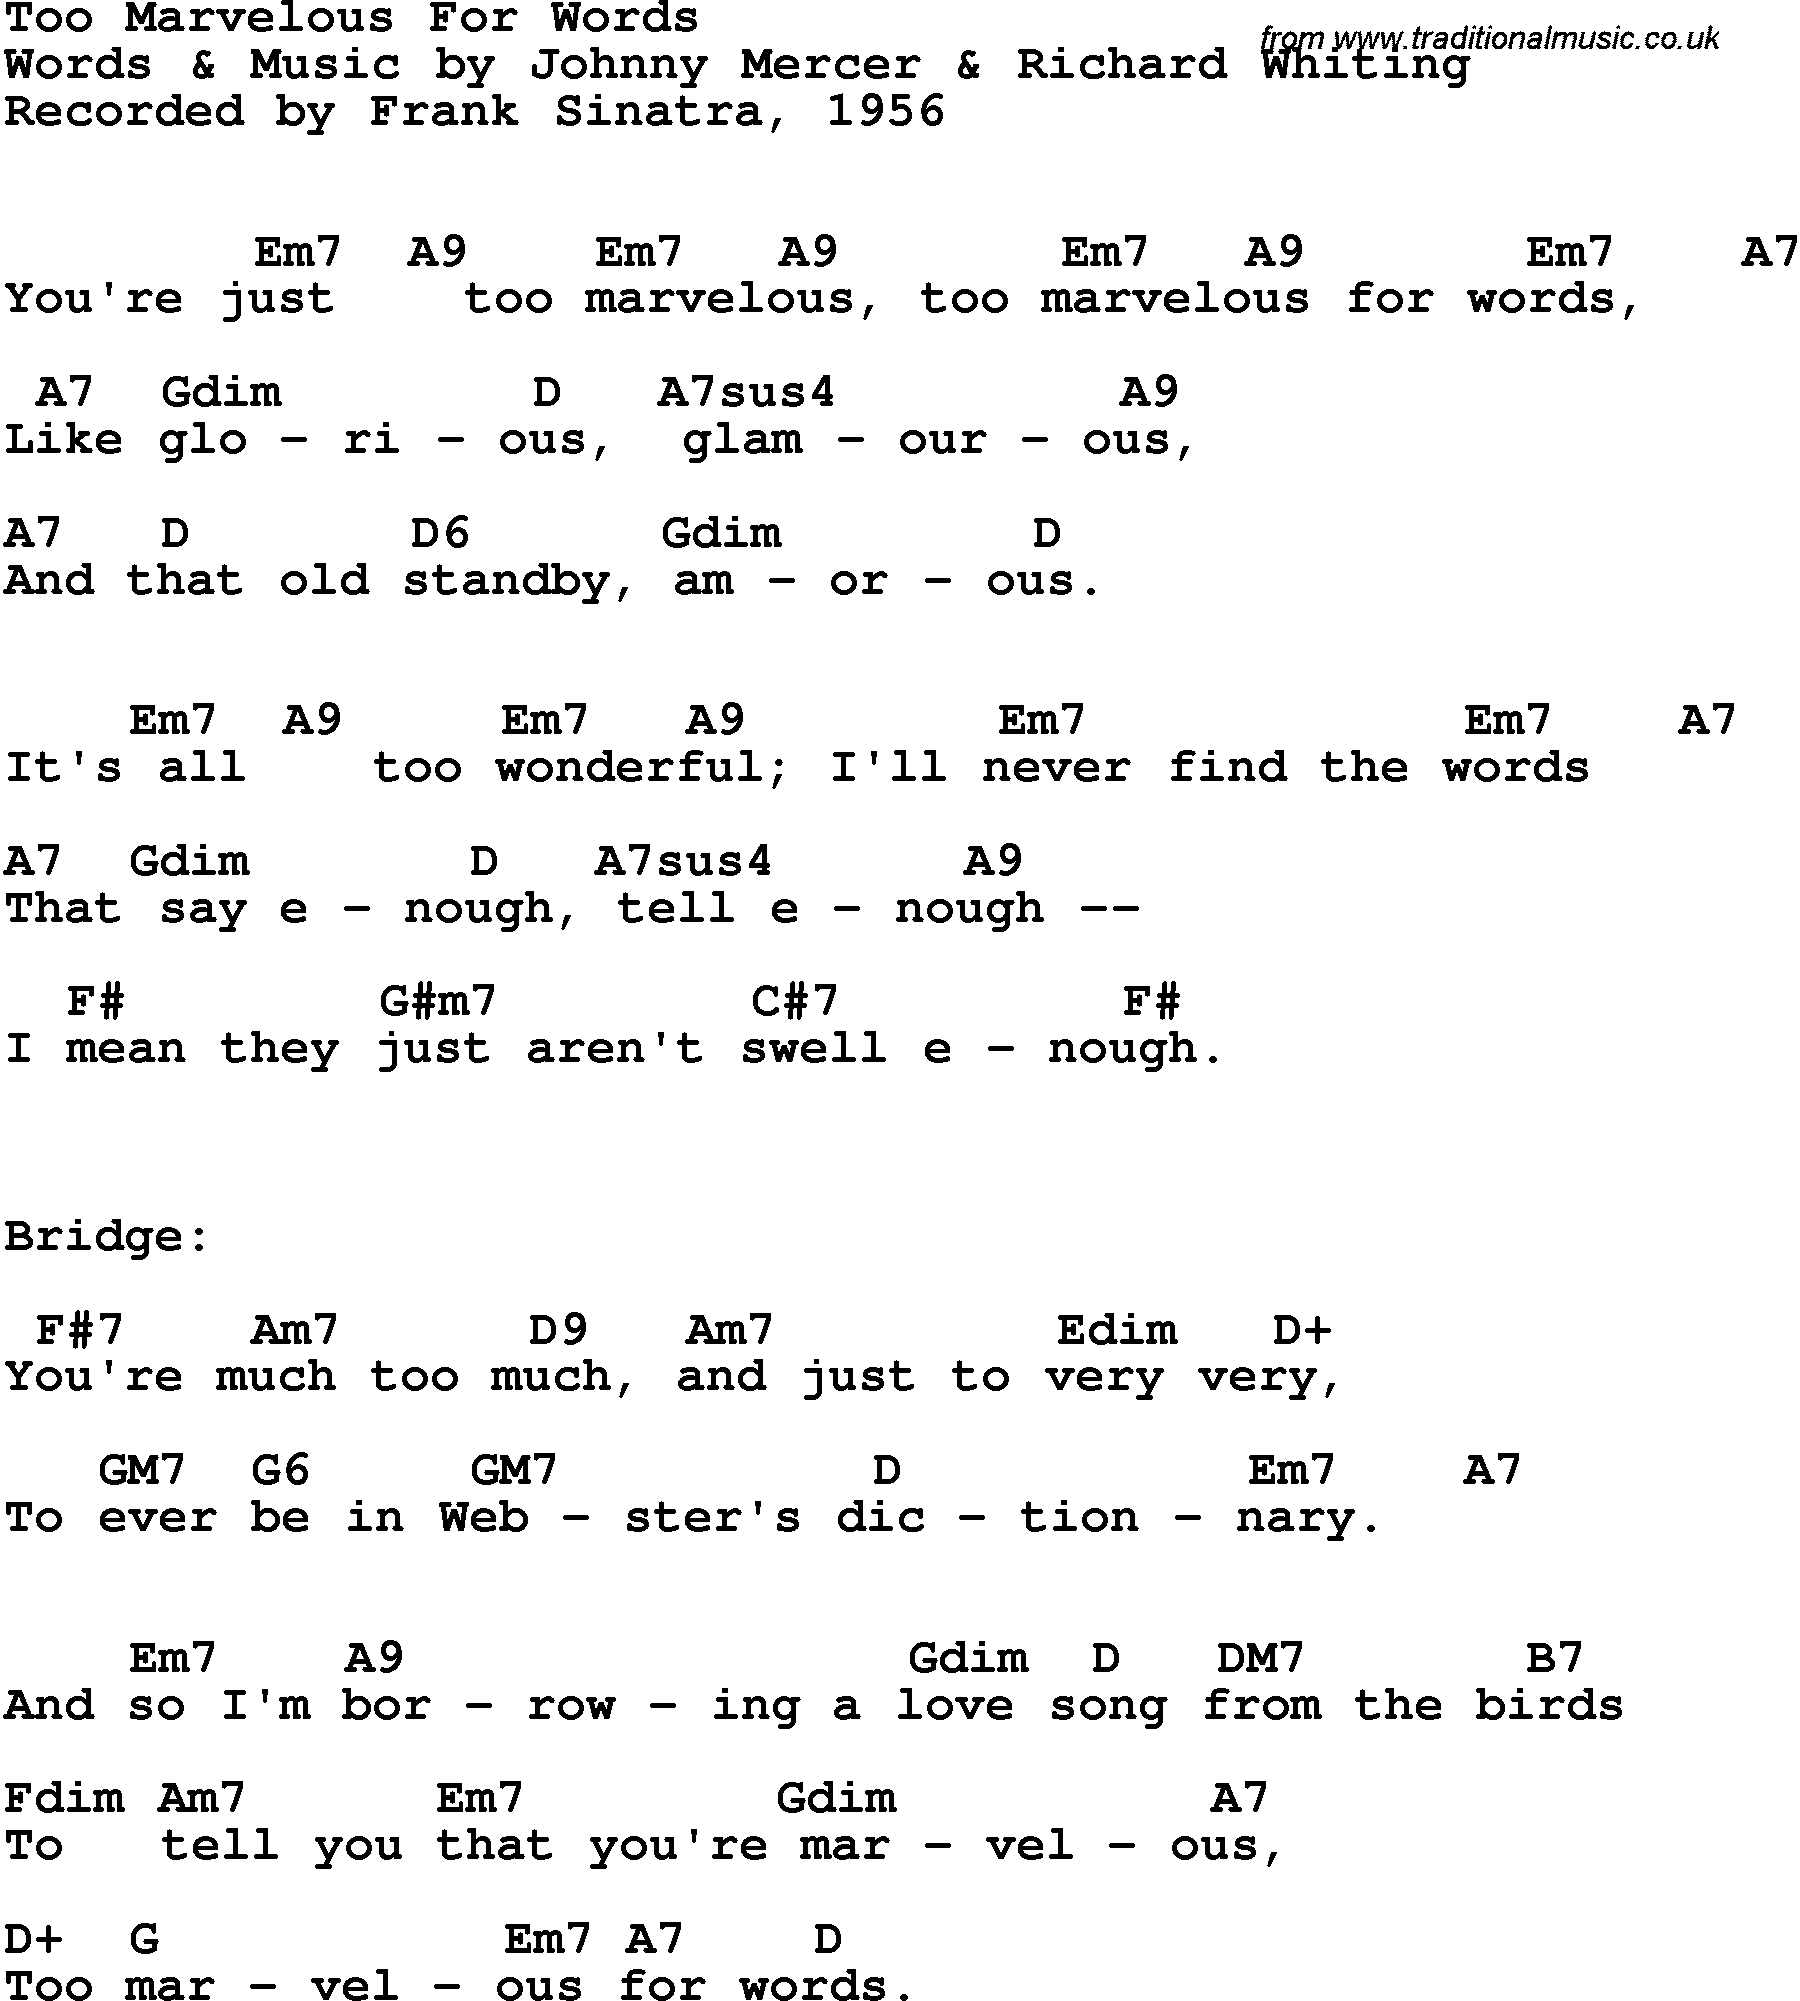 Song Lyrics with guitar chords for Too Marvelous For Words - Frank Sinatra, 1956